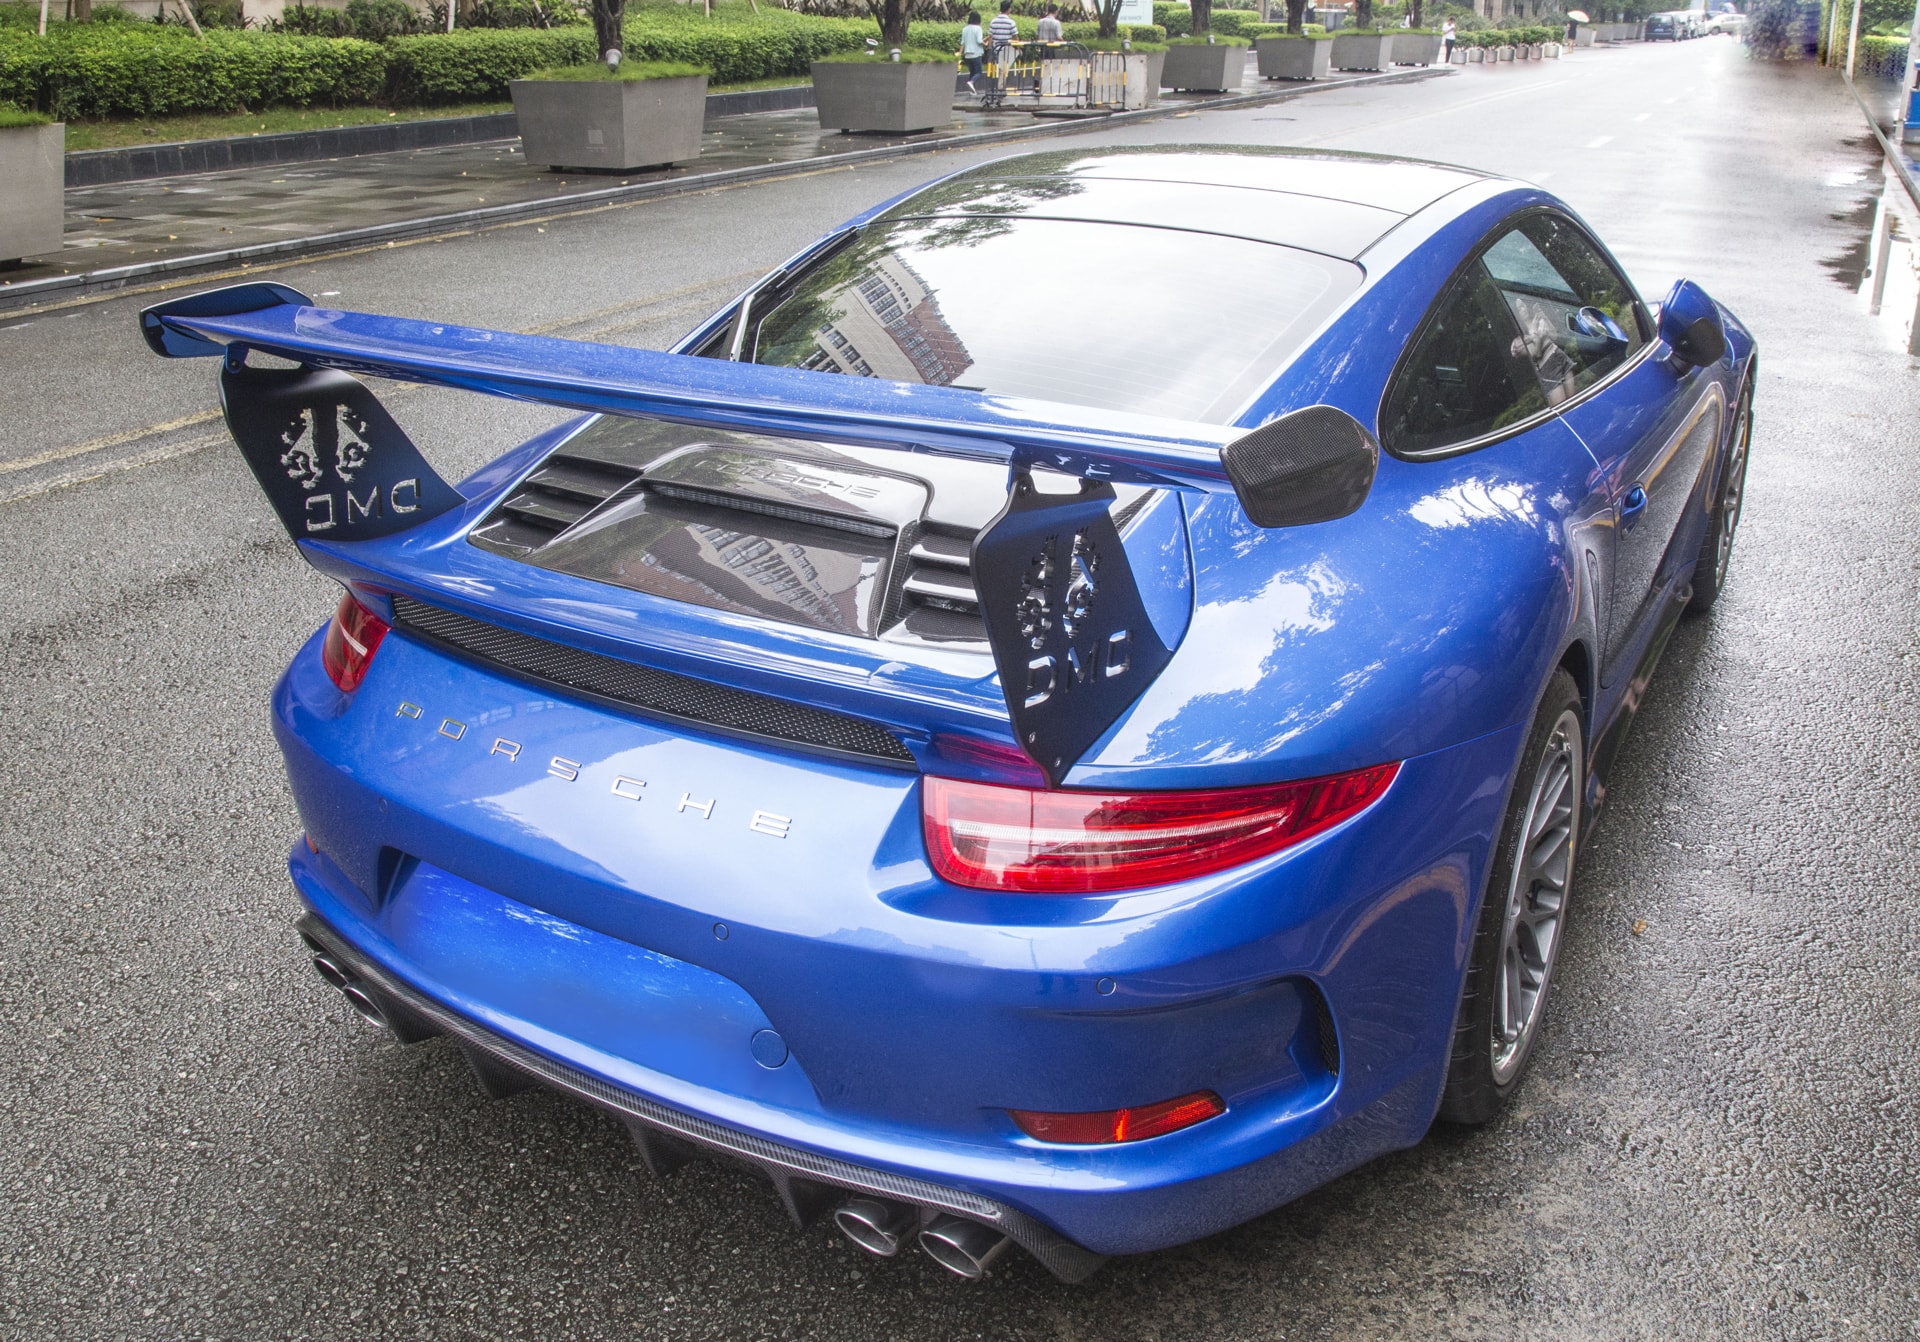 DMC Porsche 911 GT3 RS Comes with an Insane Mode for Its Wing, Sounds